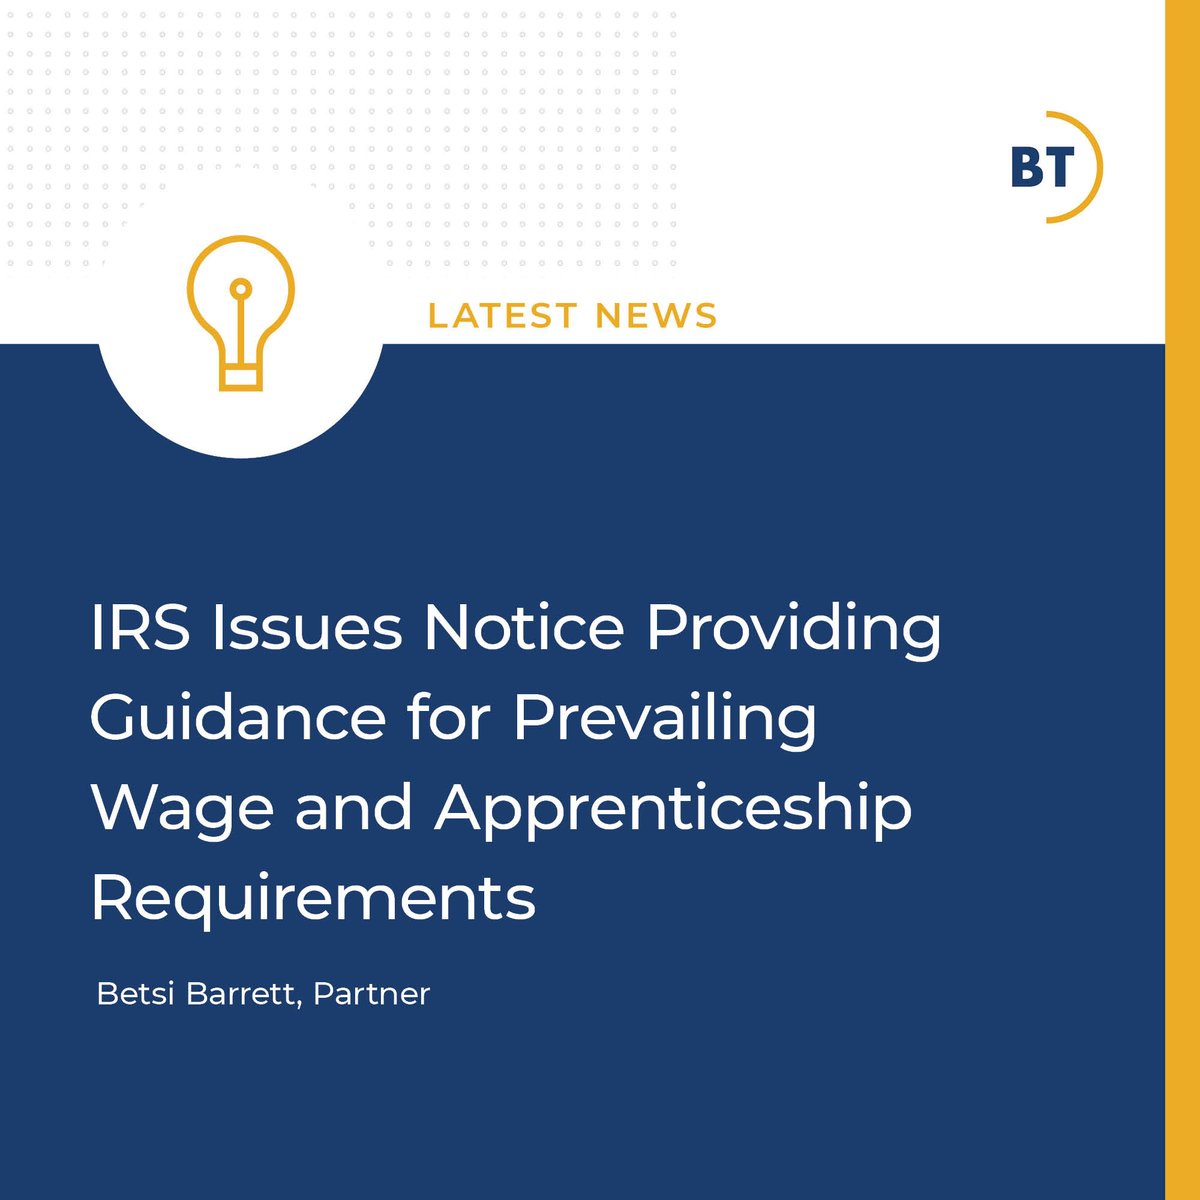 On November 30, the IRS issued Notice 2022-61, providing guidance on the prevailing wage and apprenticeship requirements that apply to Section 179D and Section 45L, as amended by the Inflation Reduction Act of 2022. Learn more: hubs.la/Q01vpMK80 #Accounting #PaceOfChange